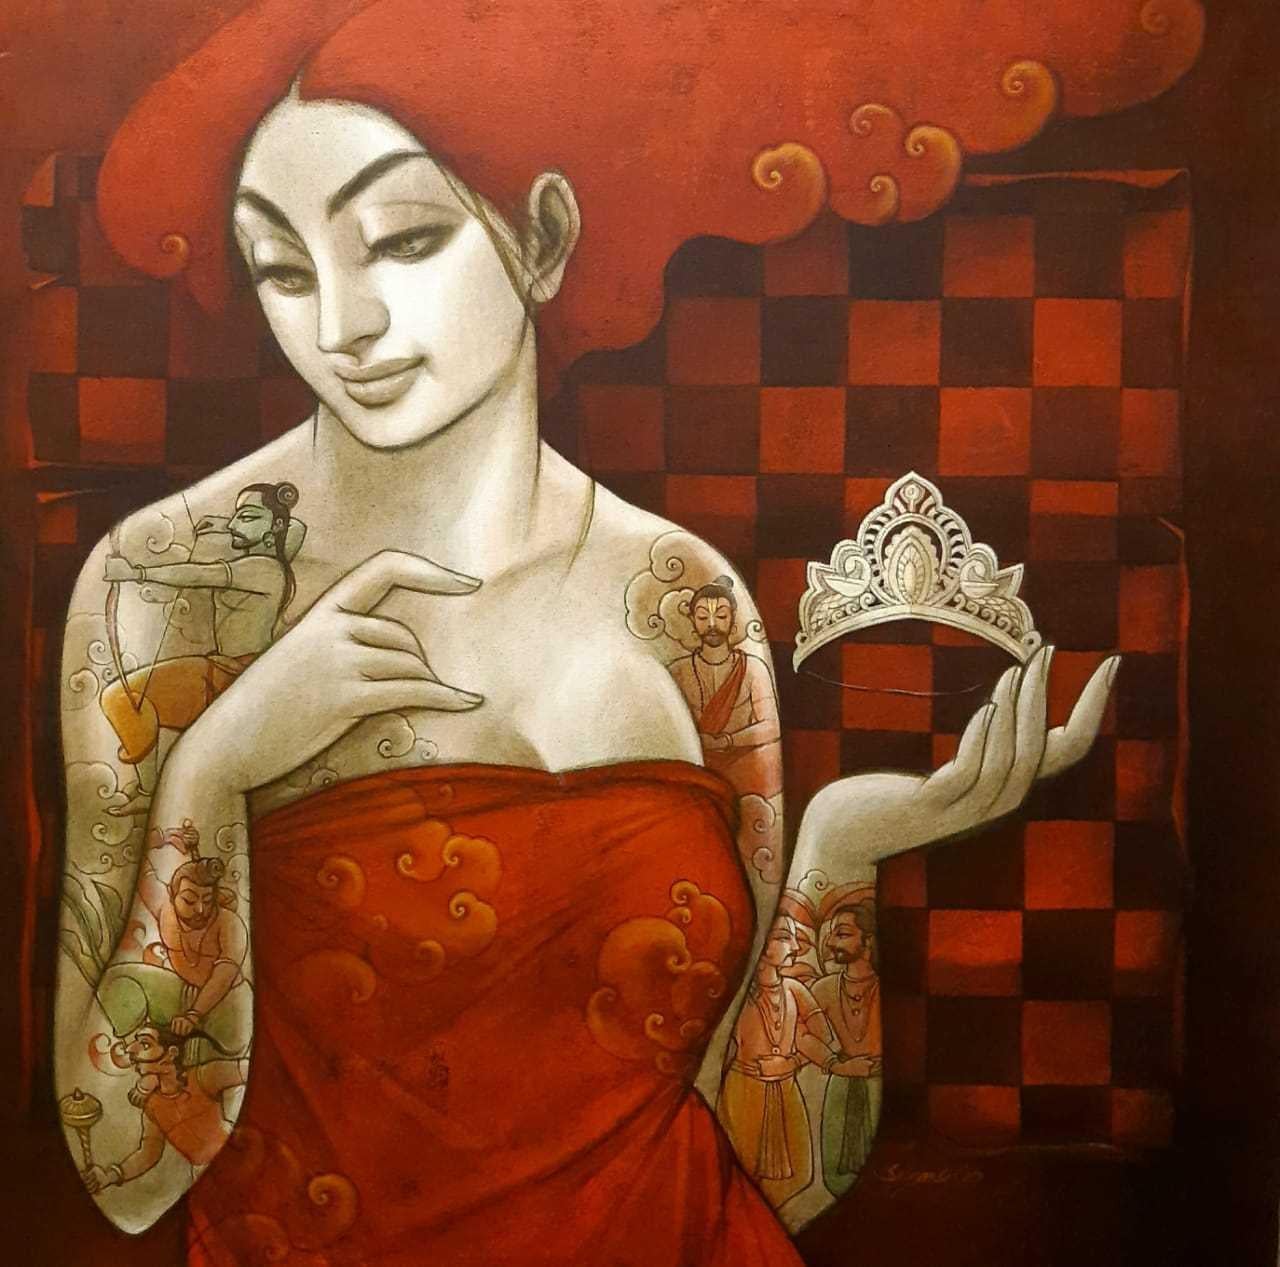 Panchali with Crown and mythology tattoo, Orange, Red Acrylic Canvas "In Stock"